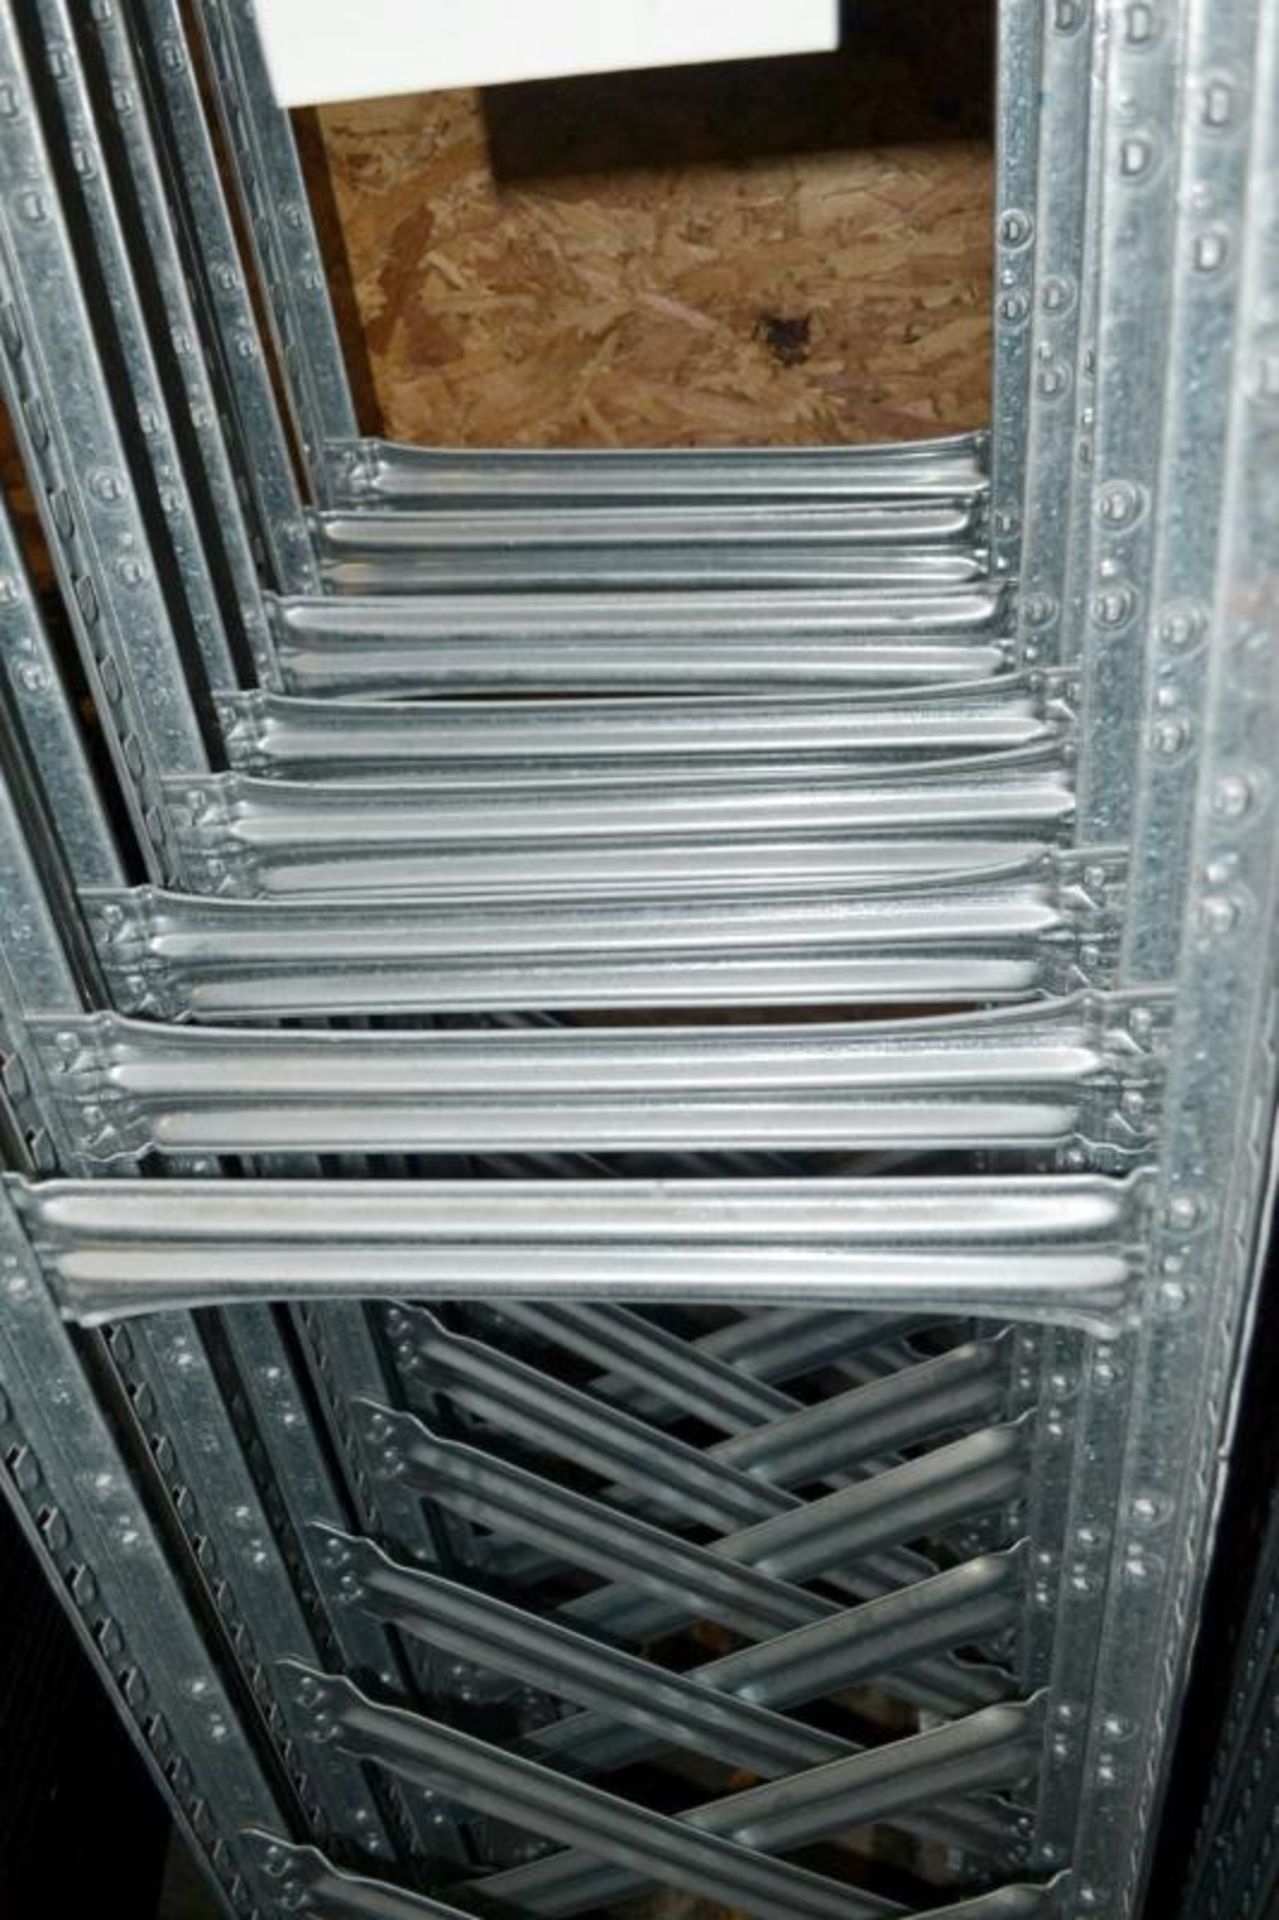 4 x Bays of Metalsistem Steel Modular Storage Shelving - Includes 53 Pieces - Recently Removed - Image 6 of 17